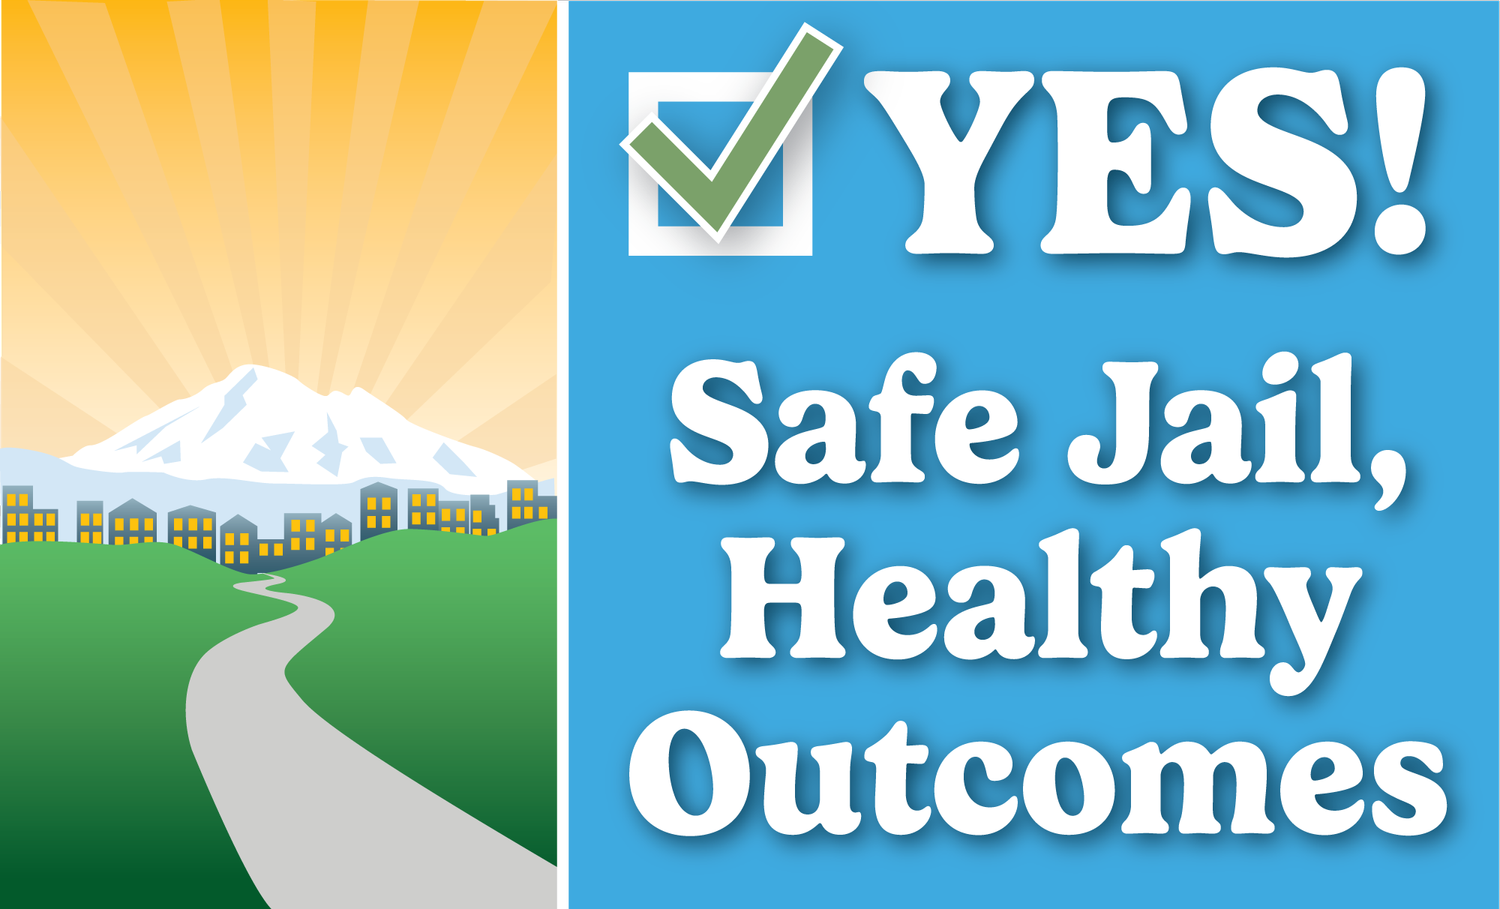 YES! Safe Jail, Healthy Outcomes | Whatcom County